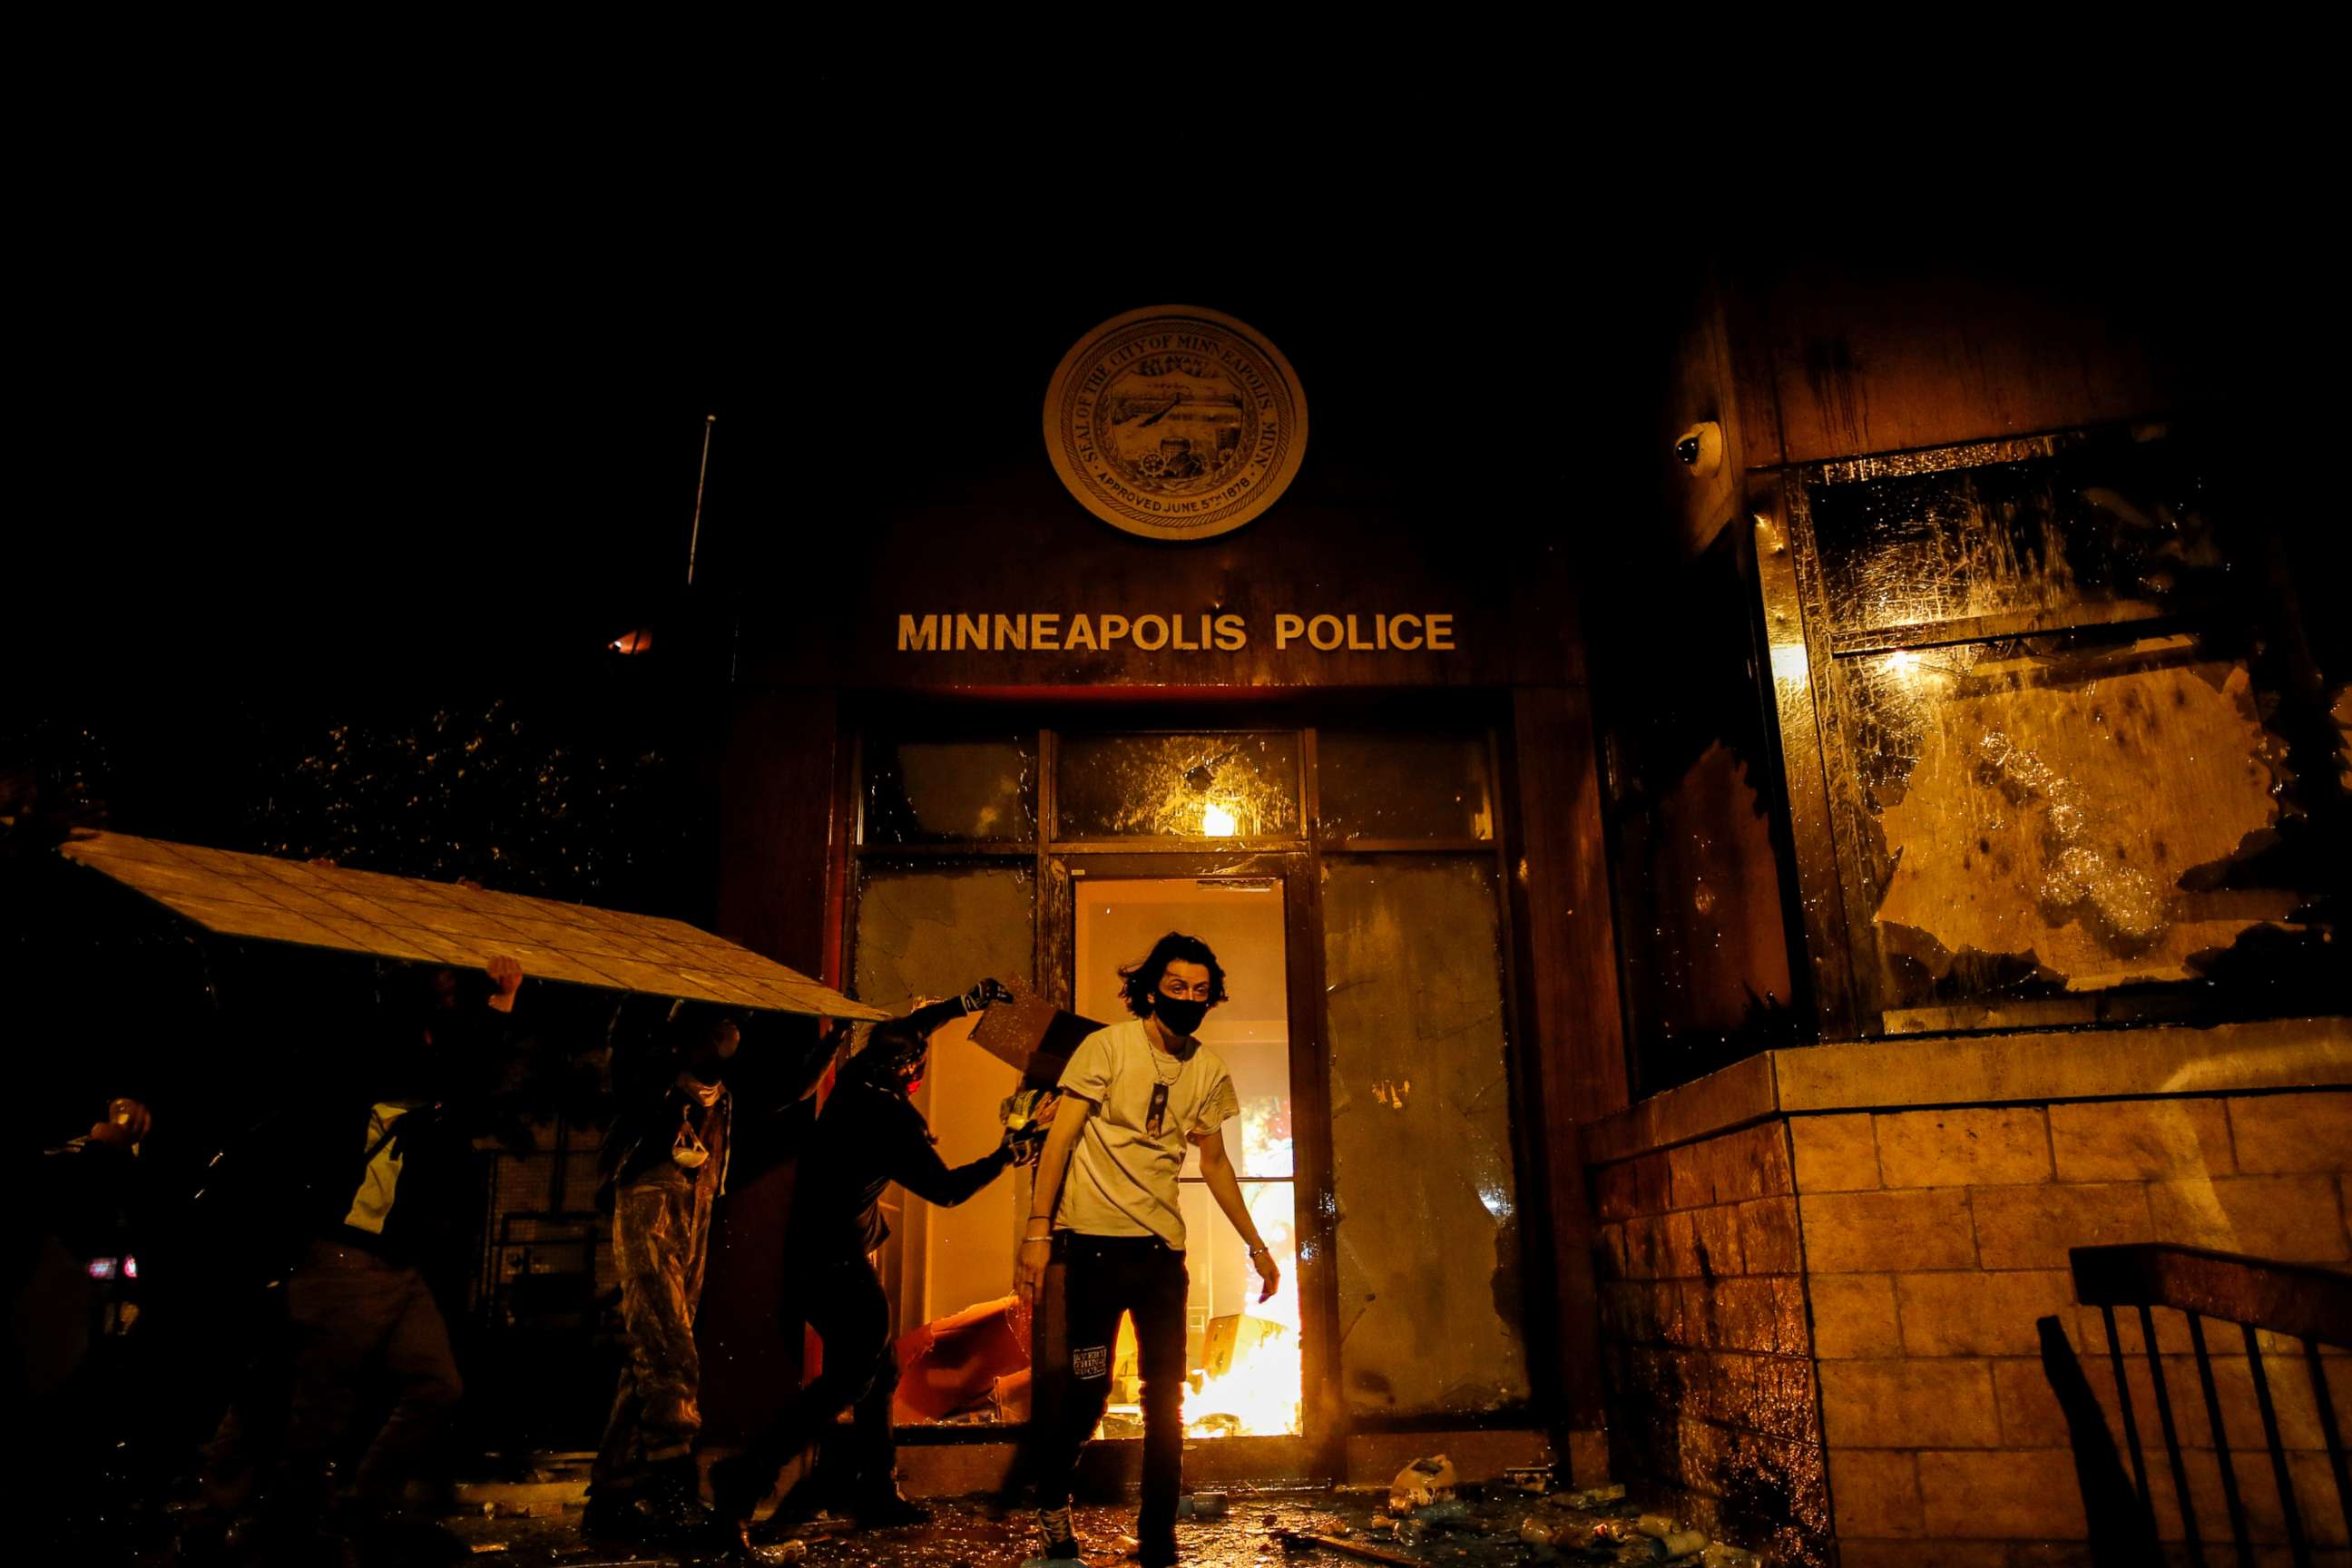 PHOTO: Protesters set fire to the entrance of a police station as demonstrations continue after a white police officer was caught on video pressing his knee into the neck of African American man George Floyd, who later died, in Minneapolis, May 28, 2020.